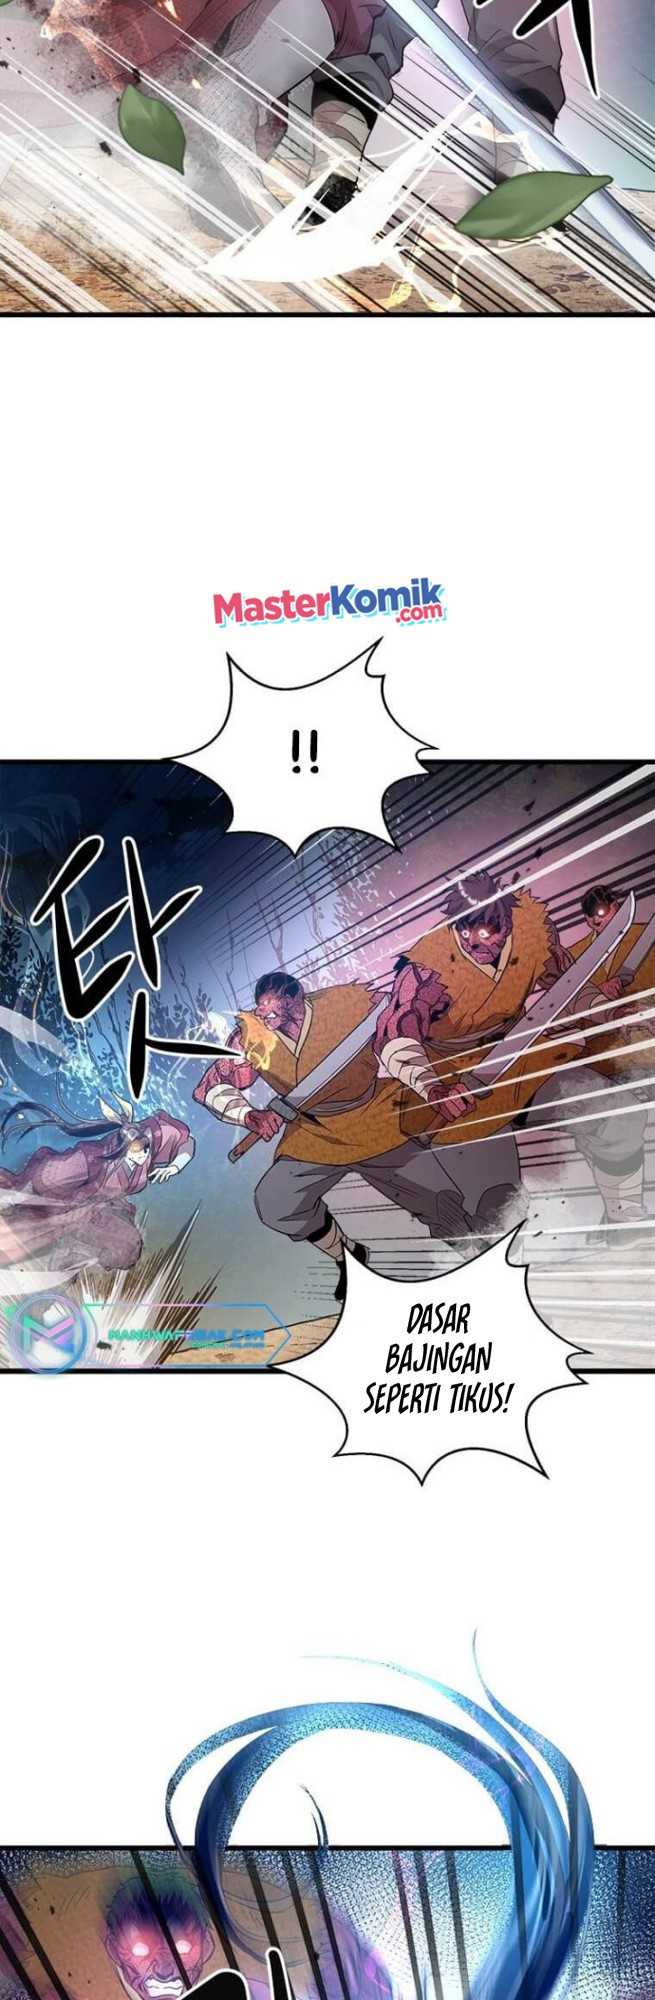 Strongest Fighter Chapter 70